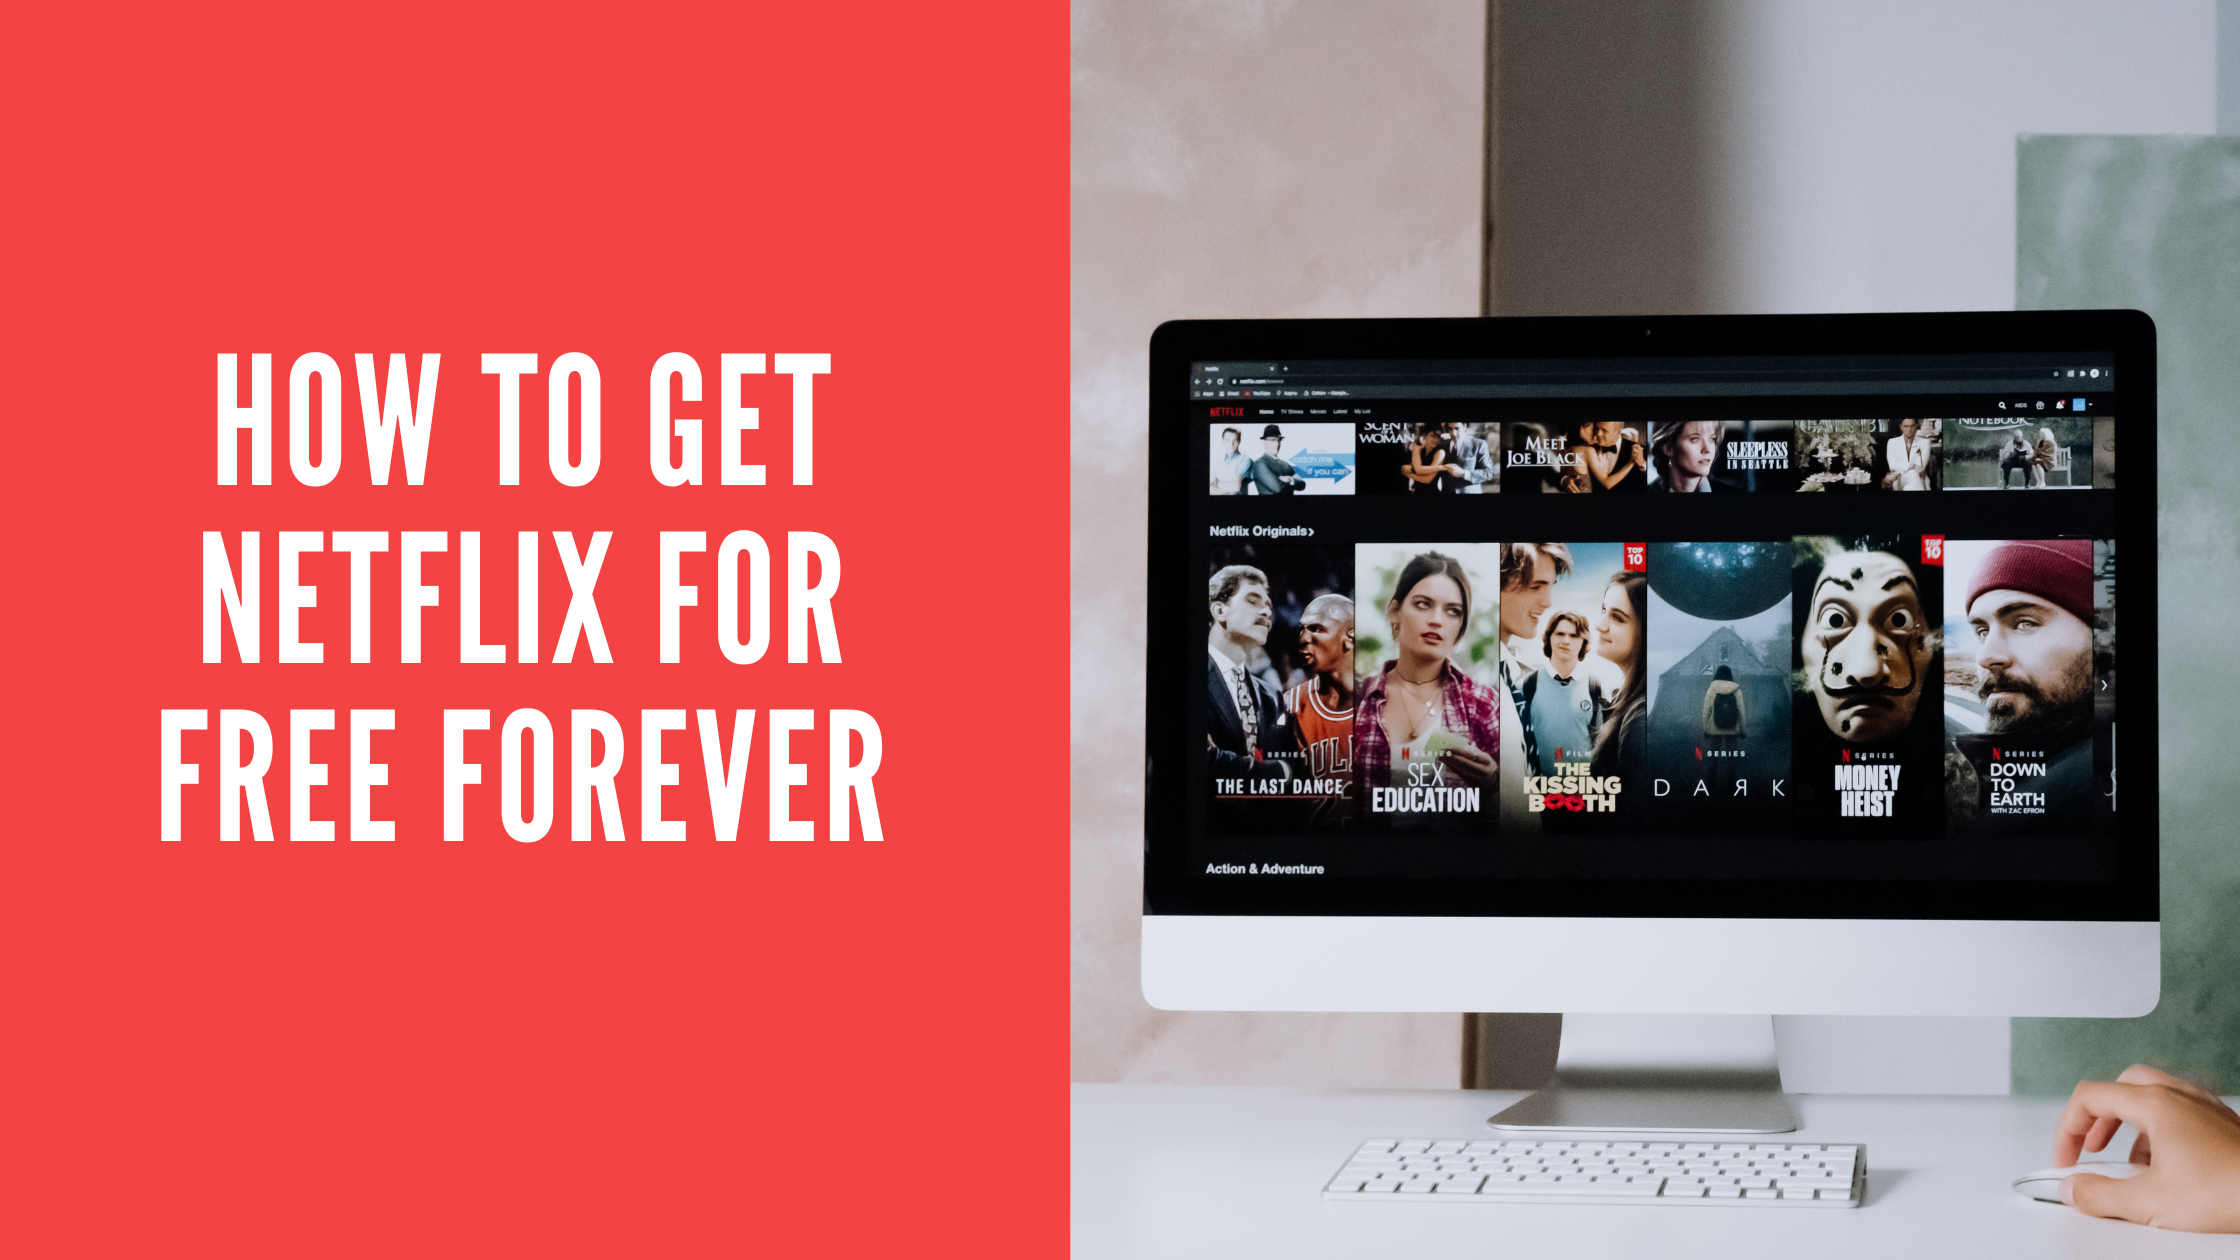 How To Get Netflix For Free Forever Without Credit Card